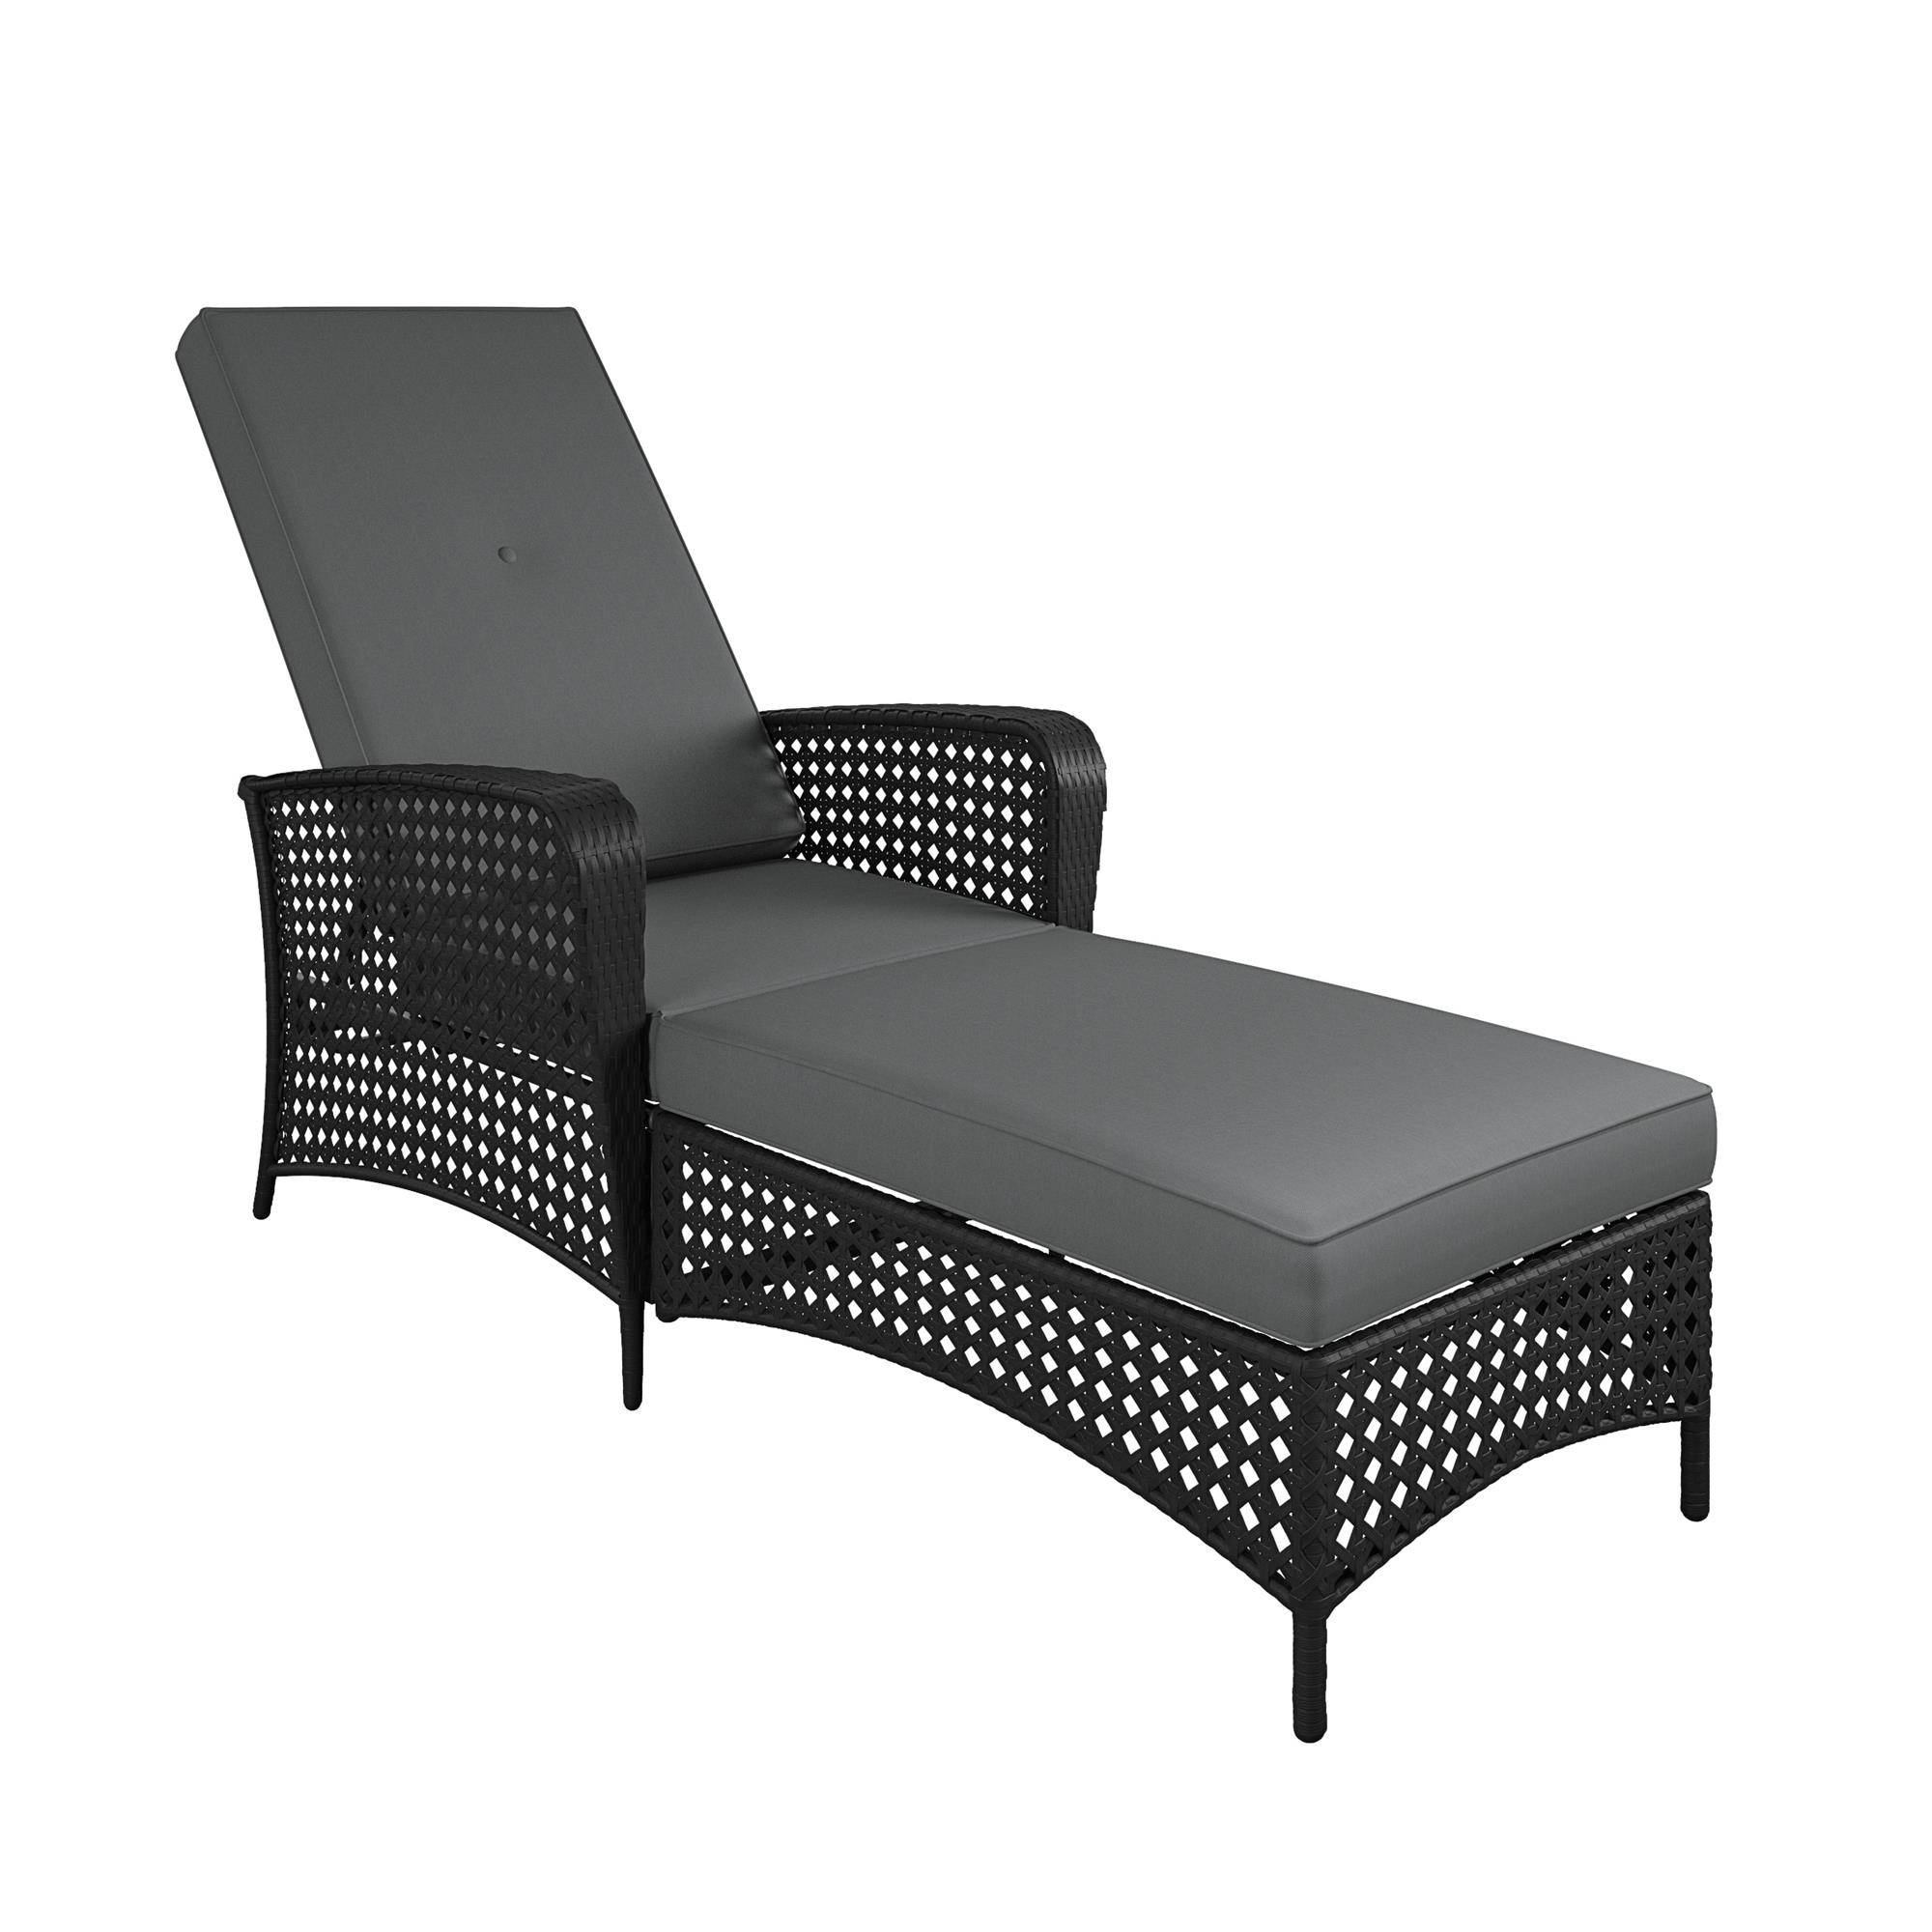 Cosco Outdoor Living Lakewood Ranch Chaise With Cushion